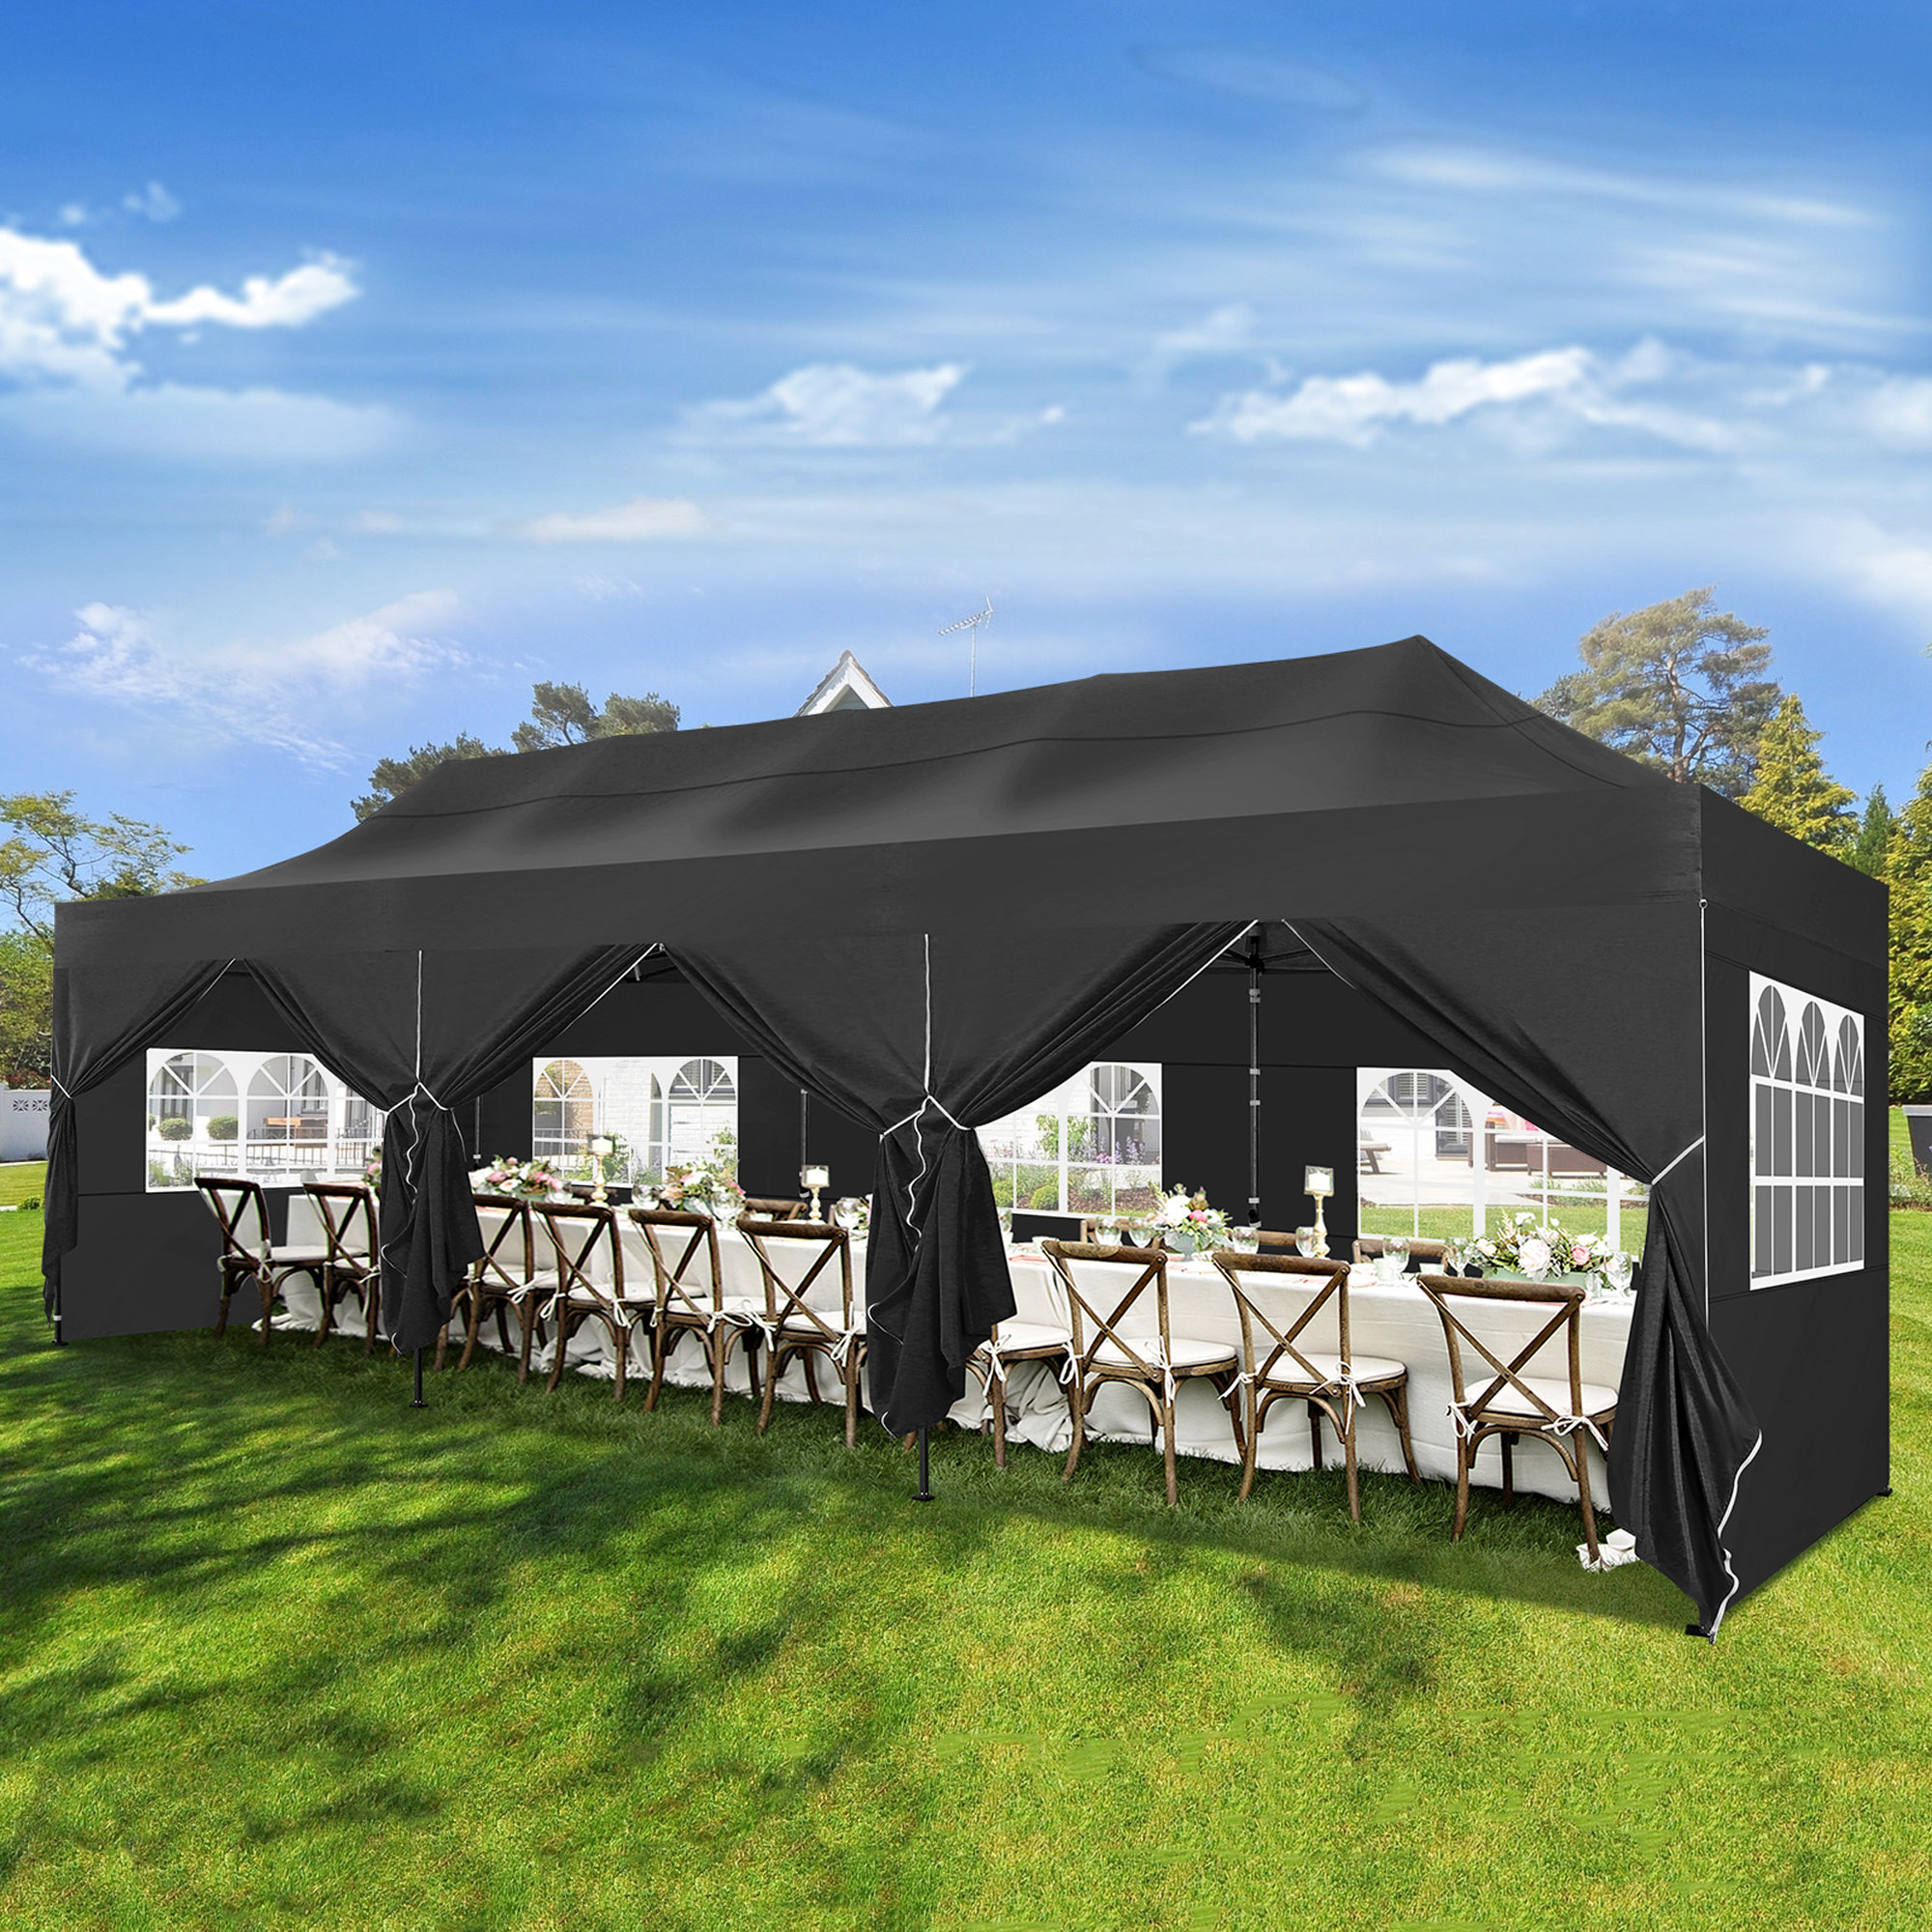 30 ft x 10 ft Real Heavy Duty Steel Pop-Up Canopy with 8 Sidewalls, Sandbags, Wheel Storage Bag DreamDwell Home Roof Color: Black